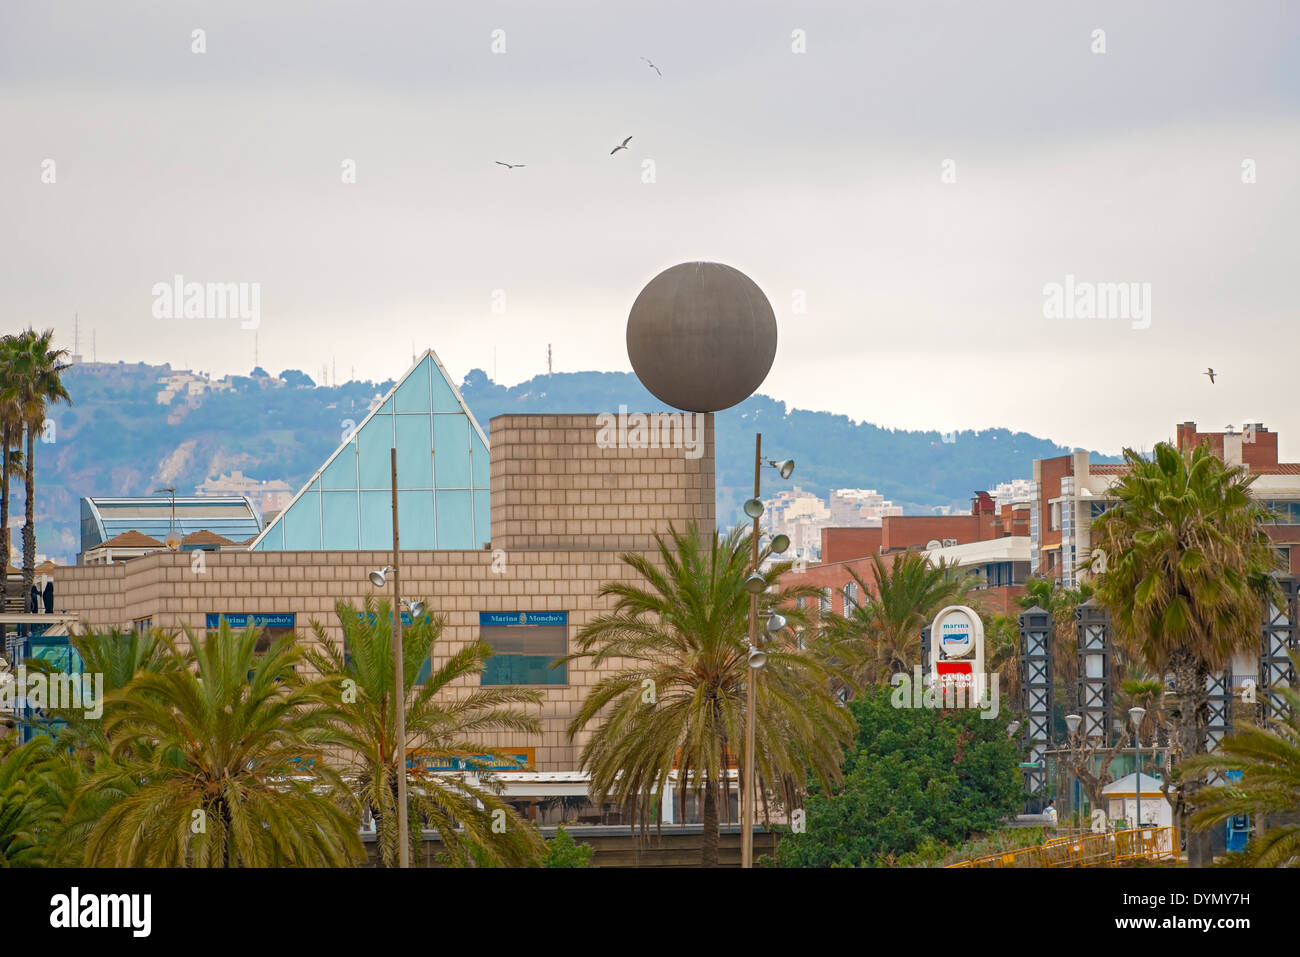 The Big Sphere Sculpture High Resolution Stock Photography and Images -  Alamy